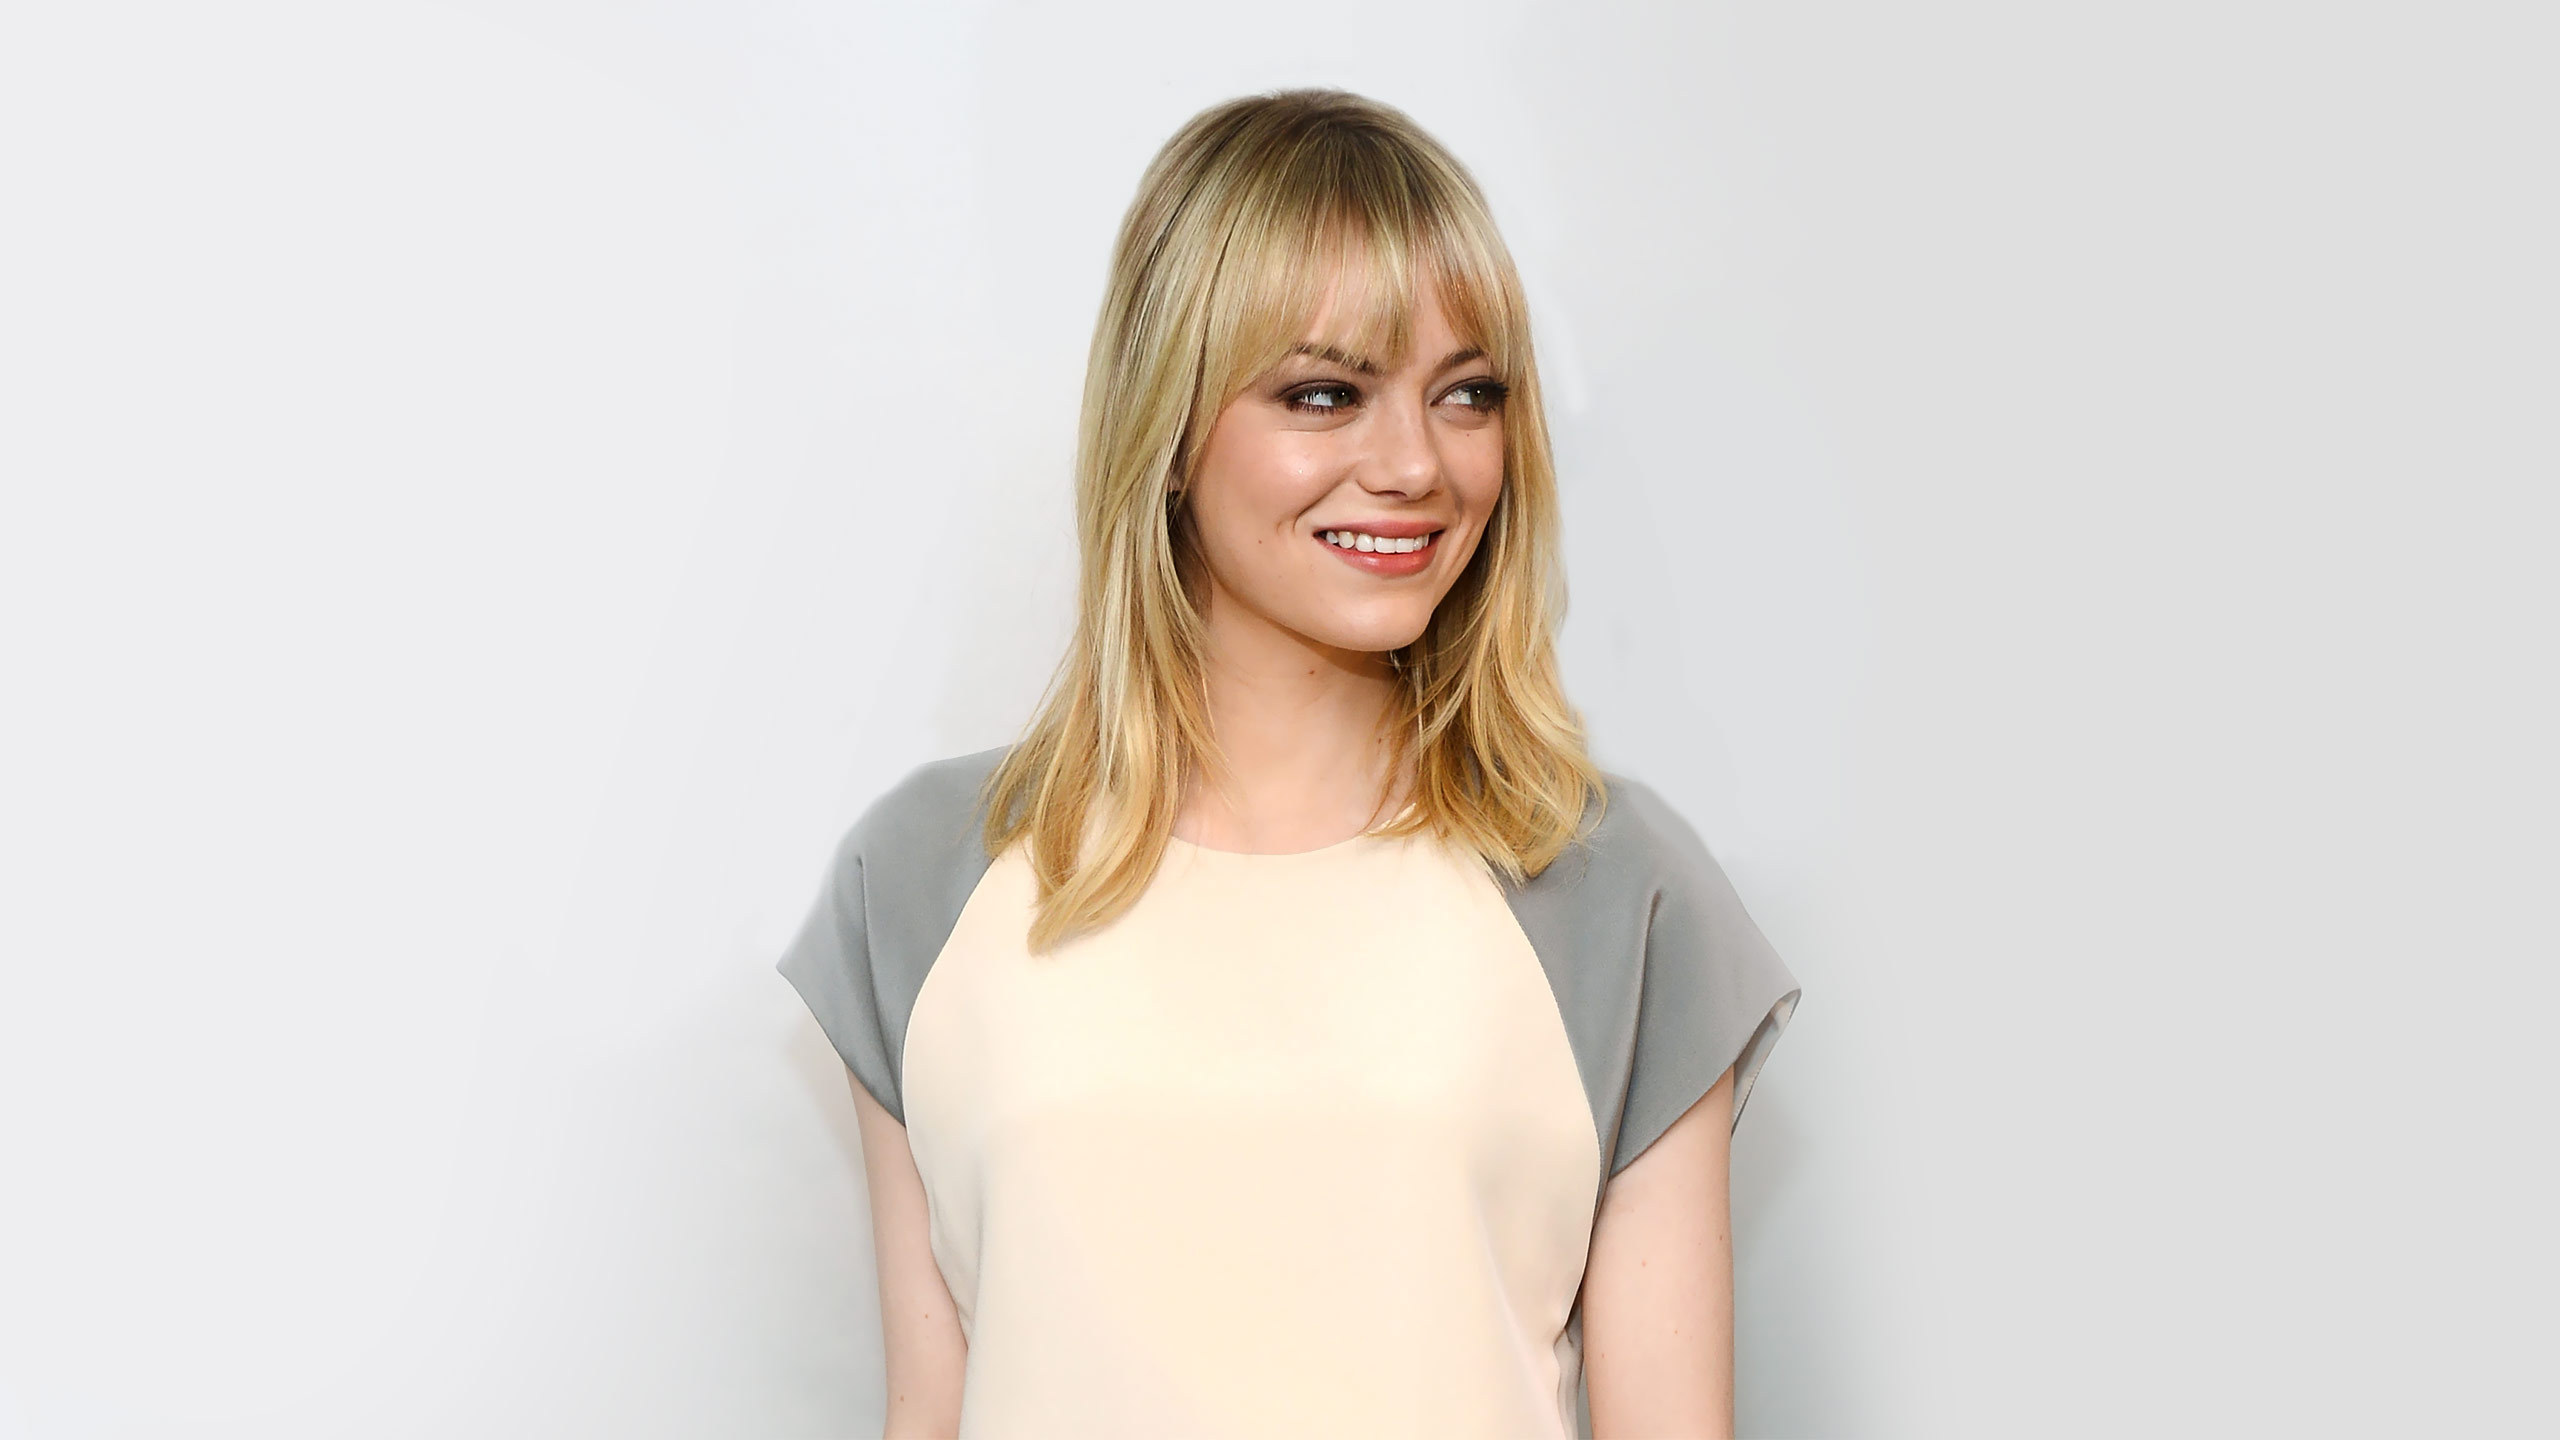 Emma Stone Wallpaper Image Photos Pictures Background